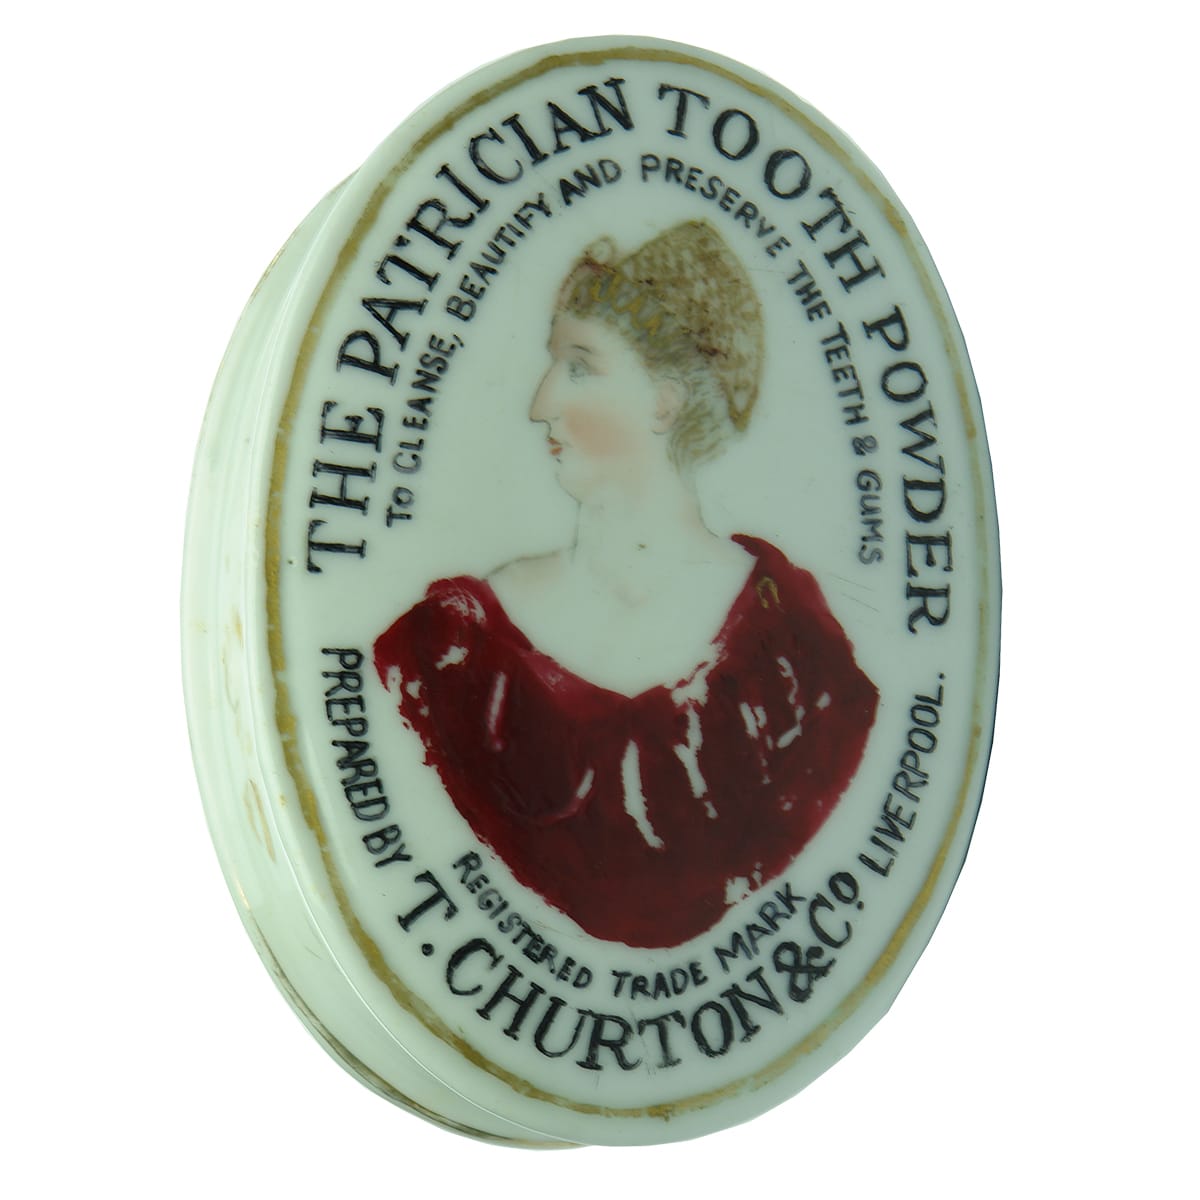 Pot Lid. The Patrician Tooth Powder. Churton & Co Liverpool. Overglazed design on oval lid. With correct base.